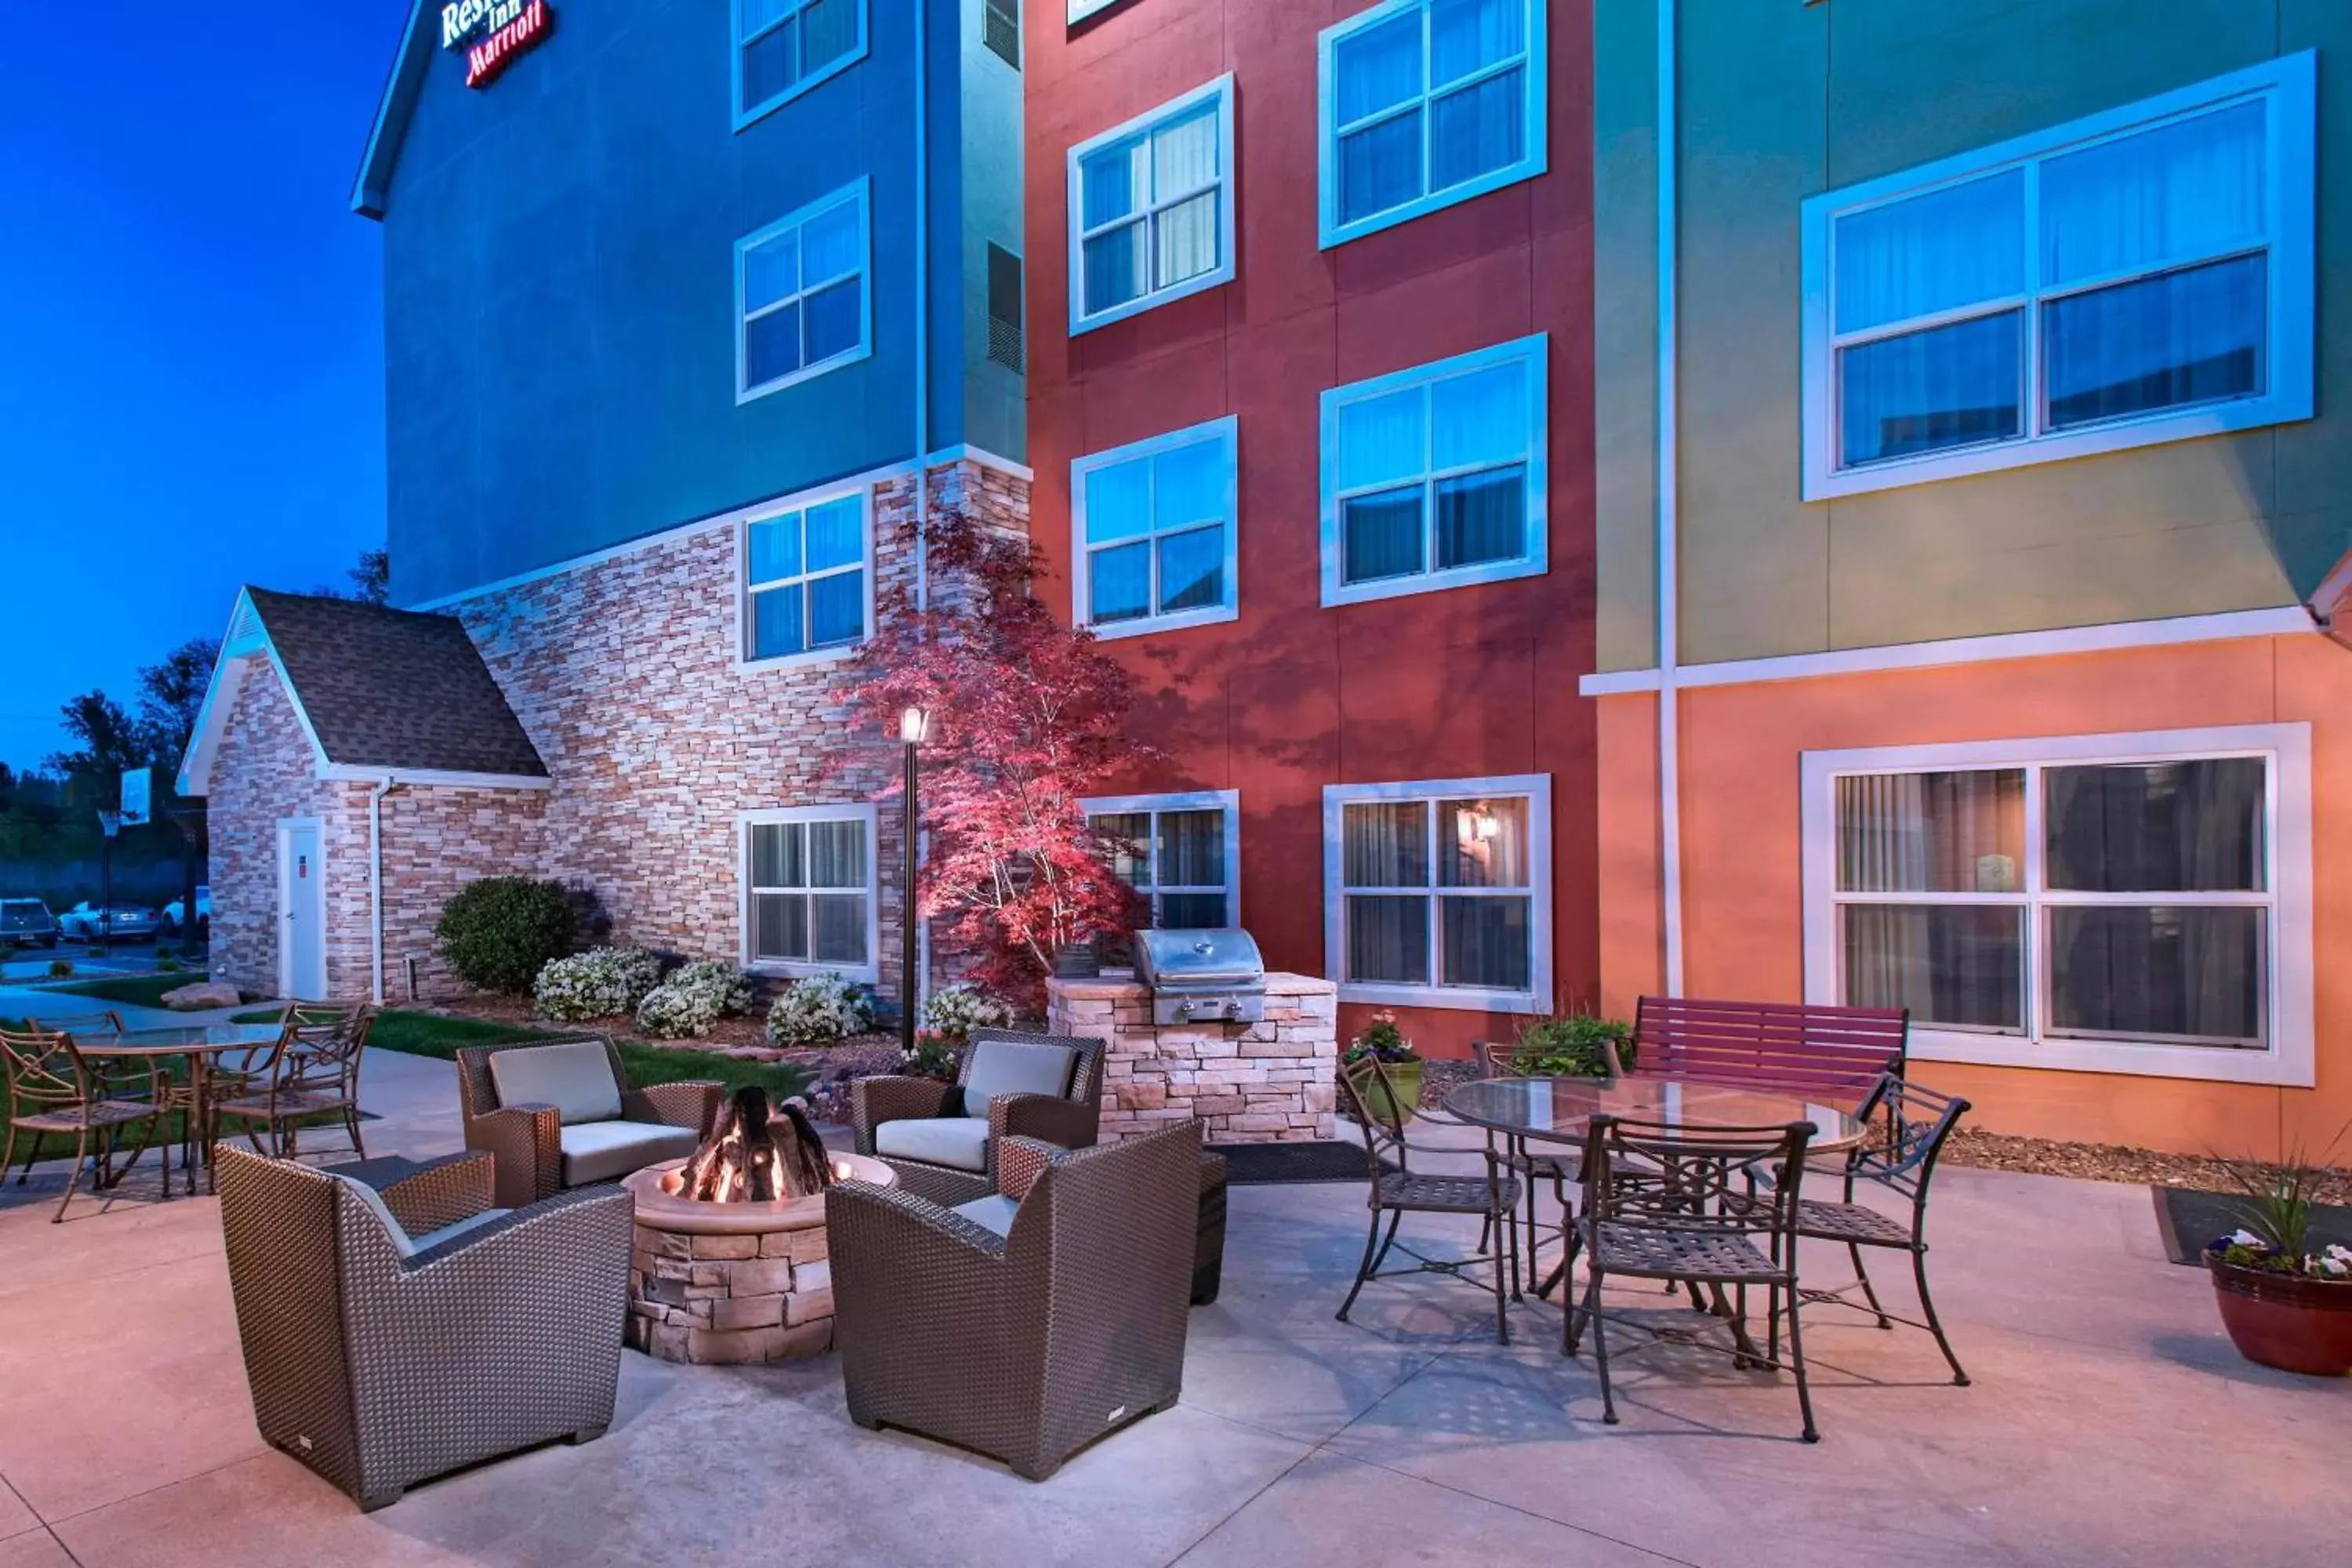 Property building in Residence Inn Columbia